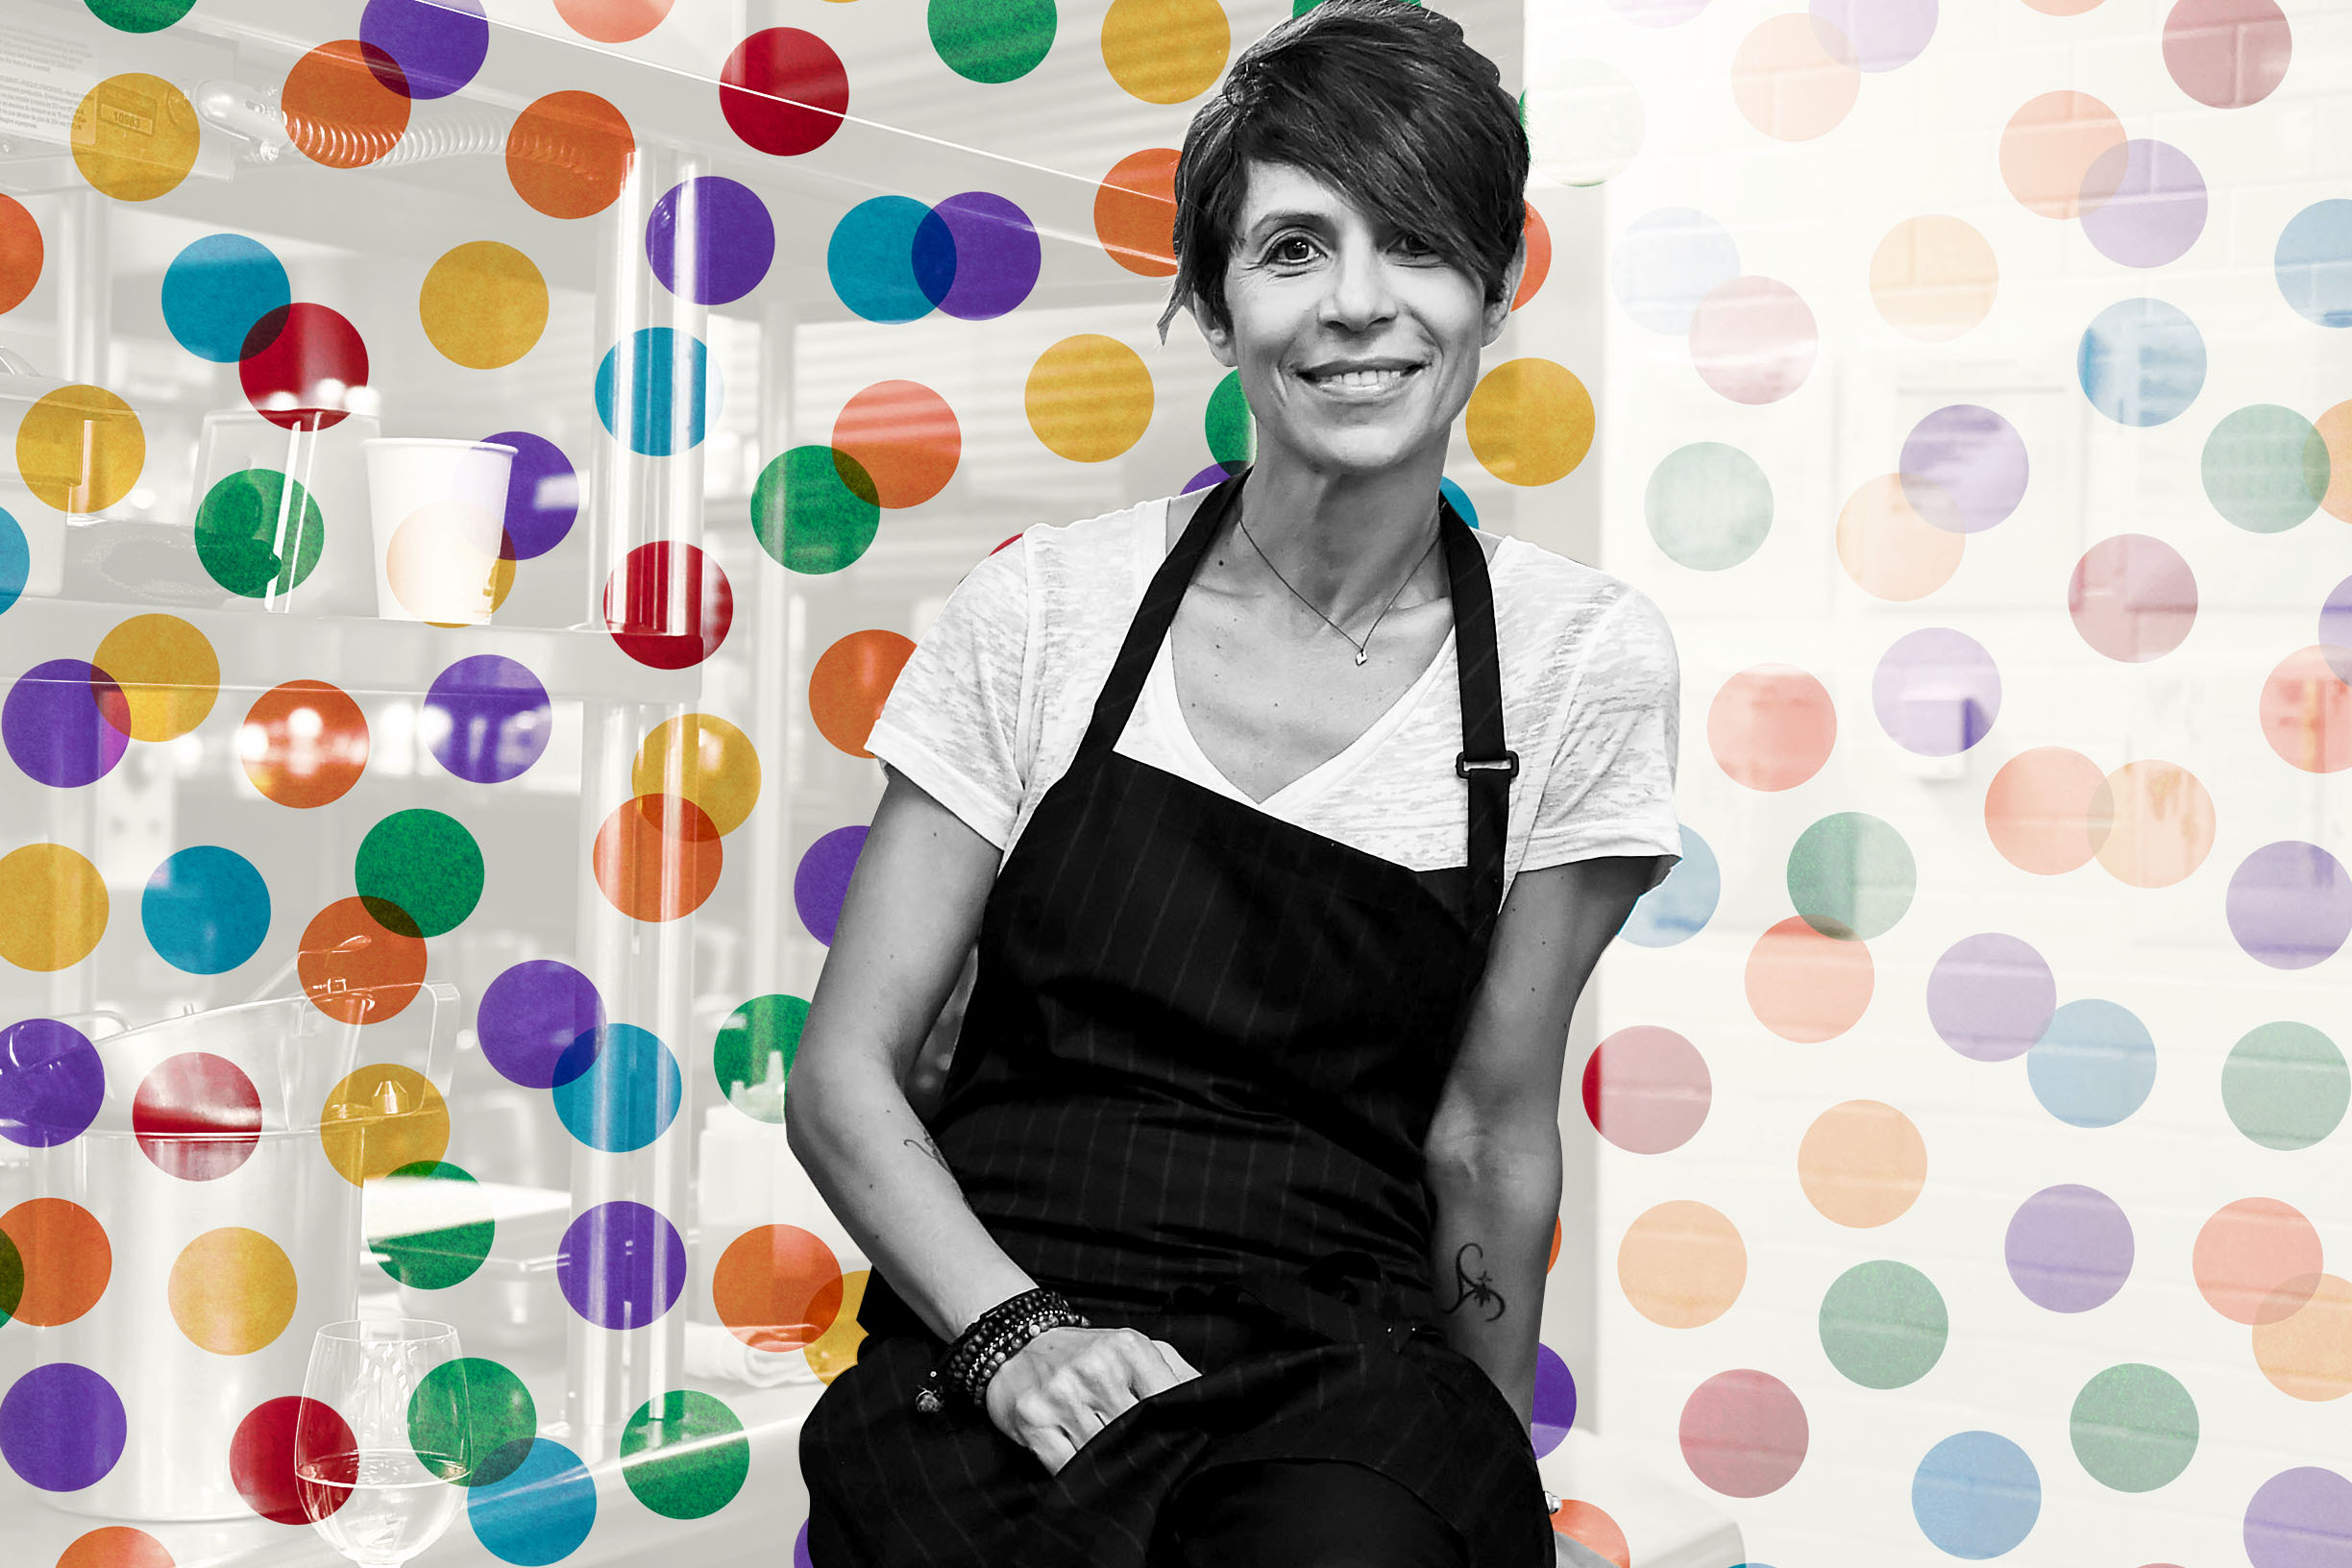 Dominique Crenn stands in front of a polka dot background